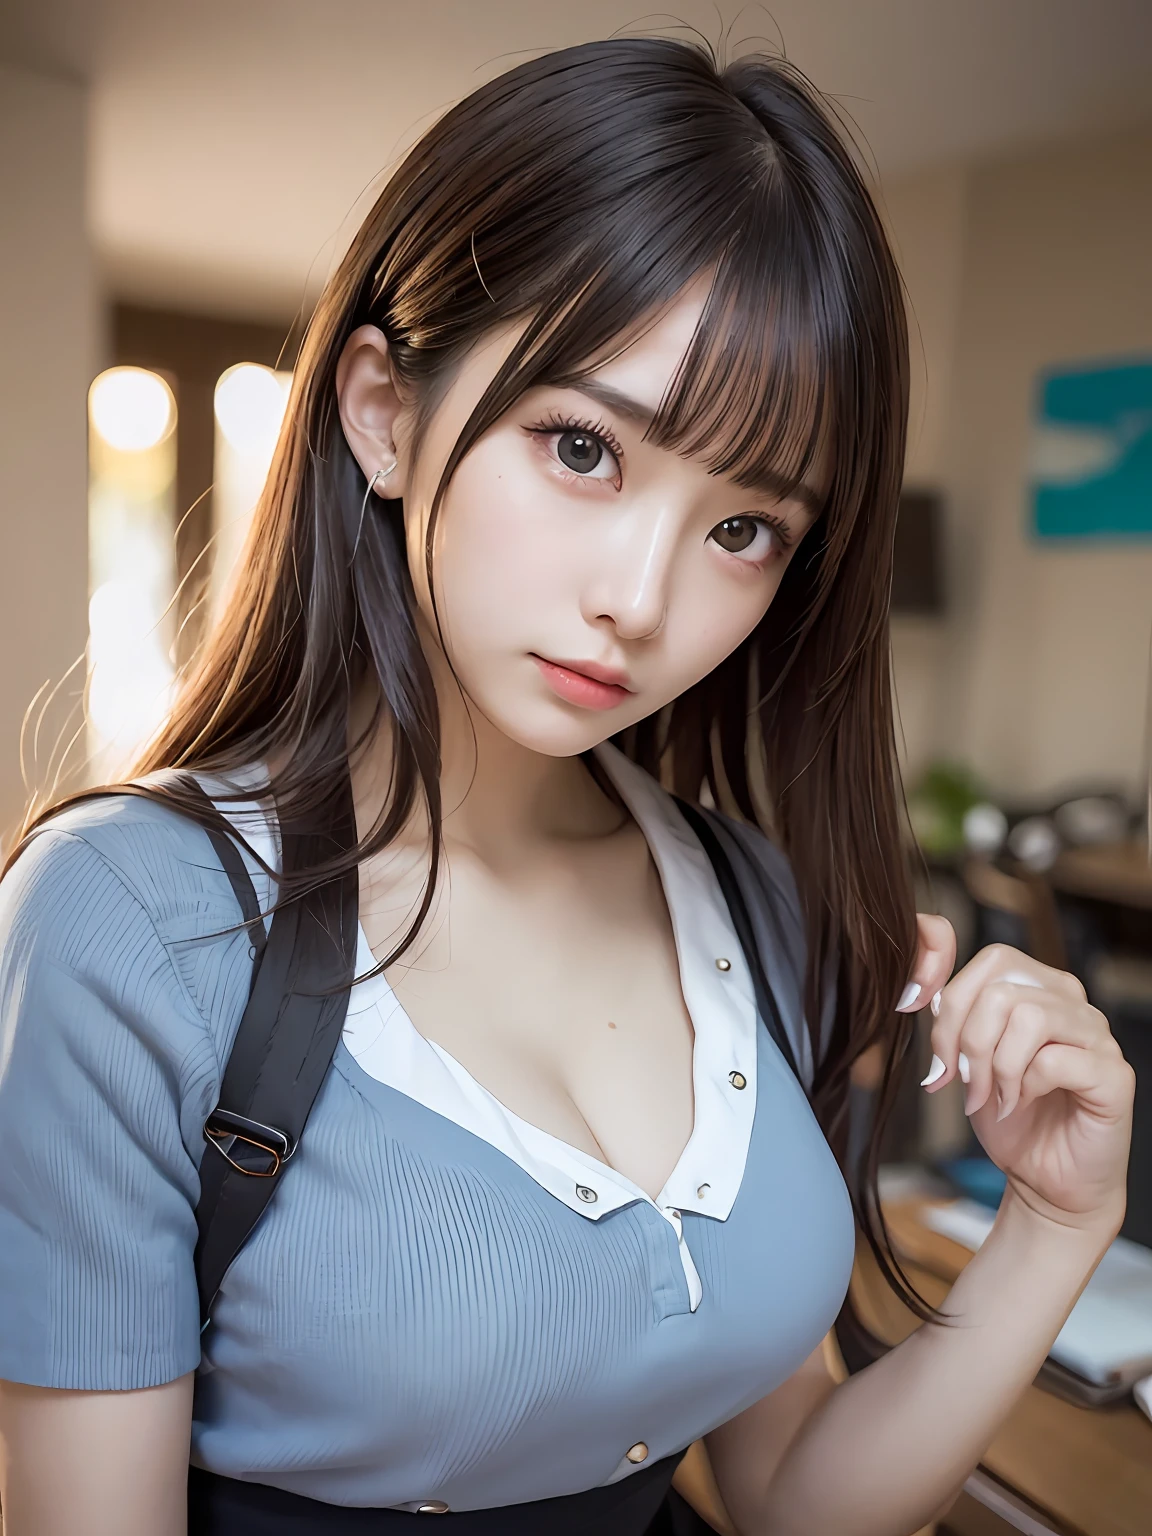 tmasterpiece，top-quality，offcial art，Highly detailed CG Unity 8K wallpapers，Like schoolgirls，16yo girl，very delicate beautiful，超A high resolution，（realisticlying：1.4），Golden hour lighting，（The upper part of the body），（Platinum shorthair：0.8），（puffy eye），looking at viewert，facingfront，ssmile，JK skirt，a blue dress，Shirt boosts long black hair，（jiayi：1.5）， closeup cleavage， tmasterpiece， best qualtiy， RAW photogr， realisticlying， the face， Incredibly Ridiculous res， beuaty girl， depth of fields， A high resolution， ultra - detailed， finedetail， The is very detailed， Extremely detailed eyes and face， Sharp pupils， realistic pupil， tack sharp focus， cinmatic lighting